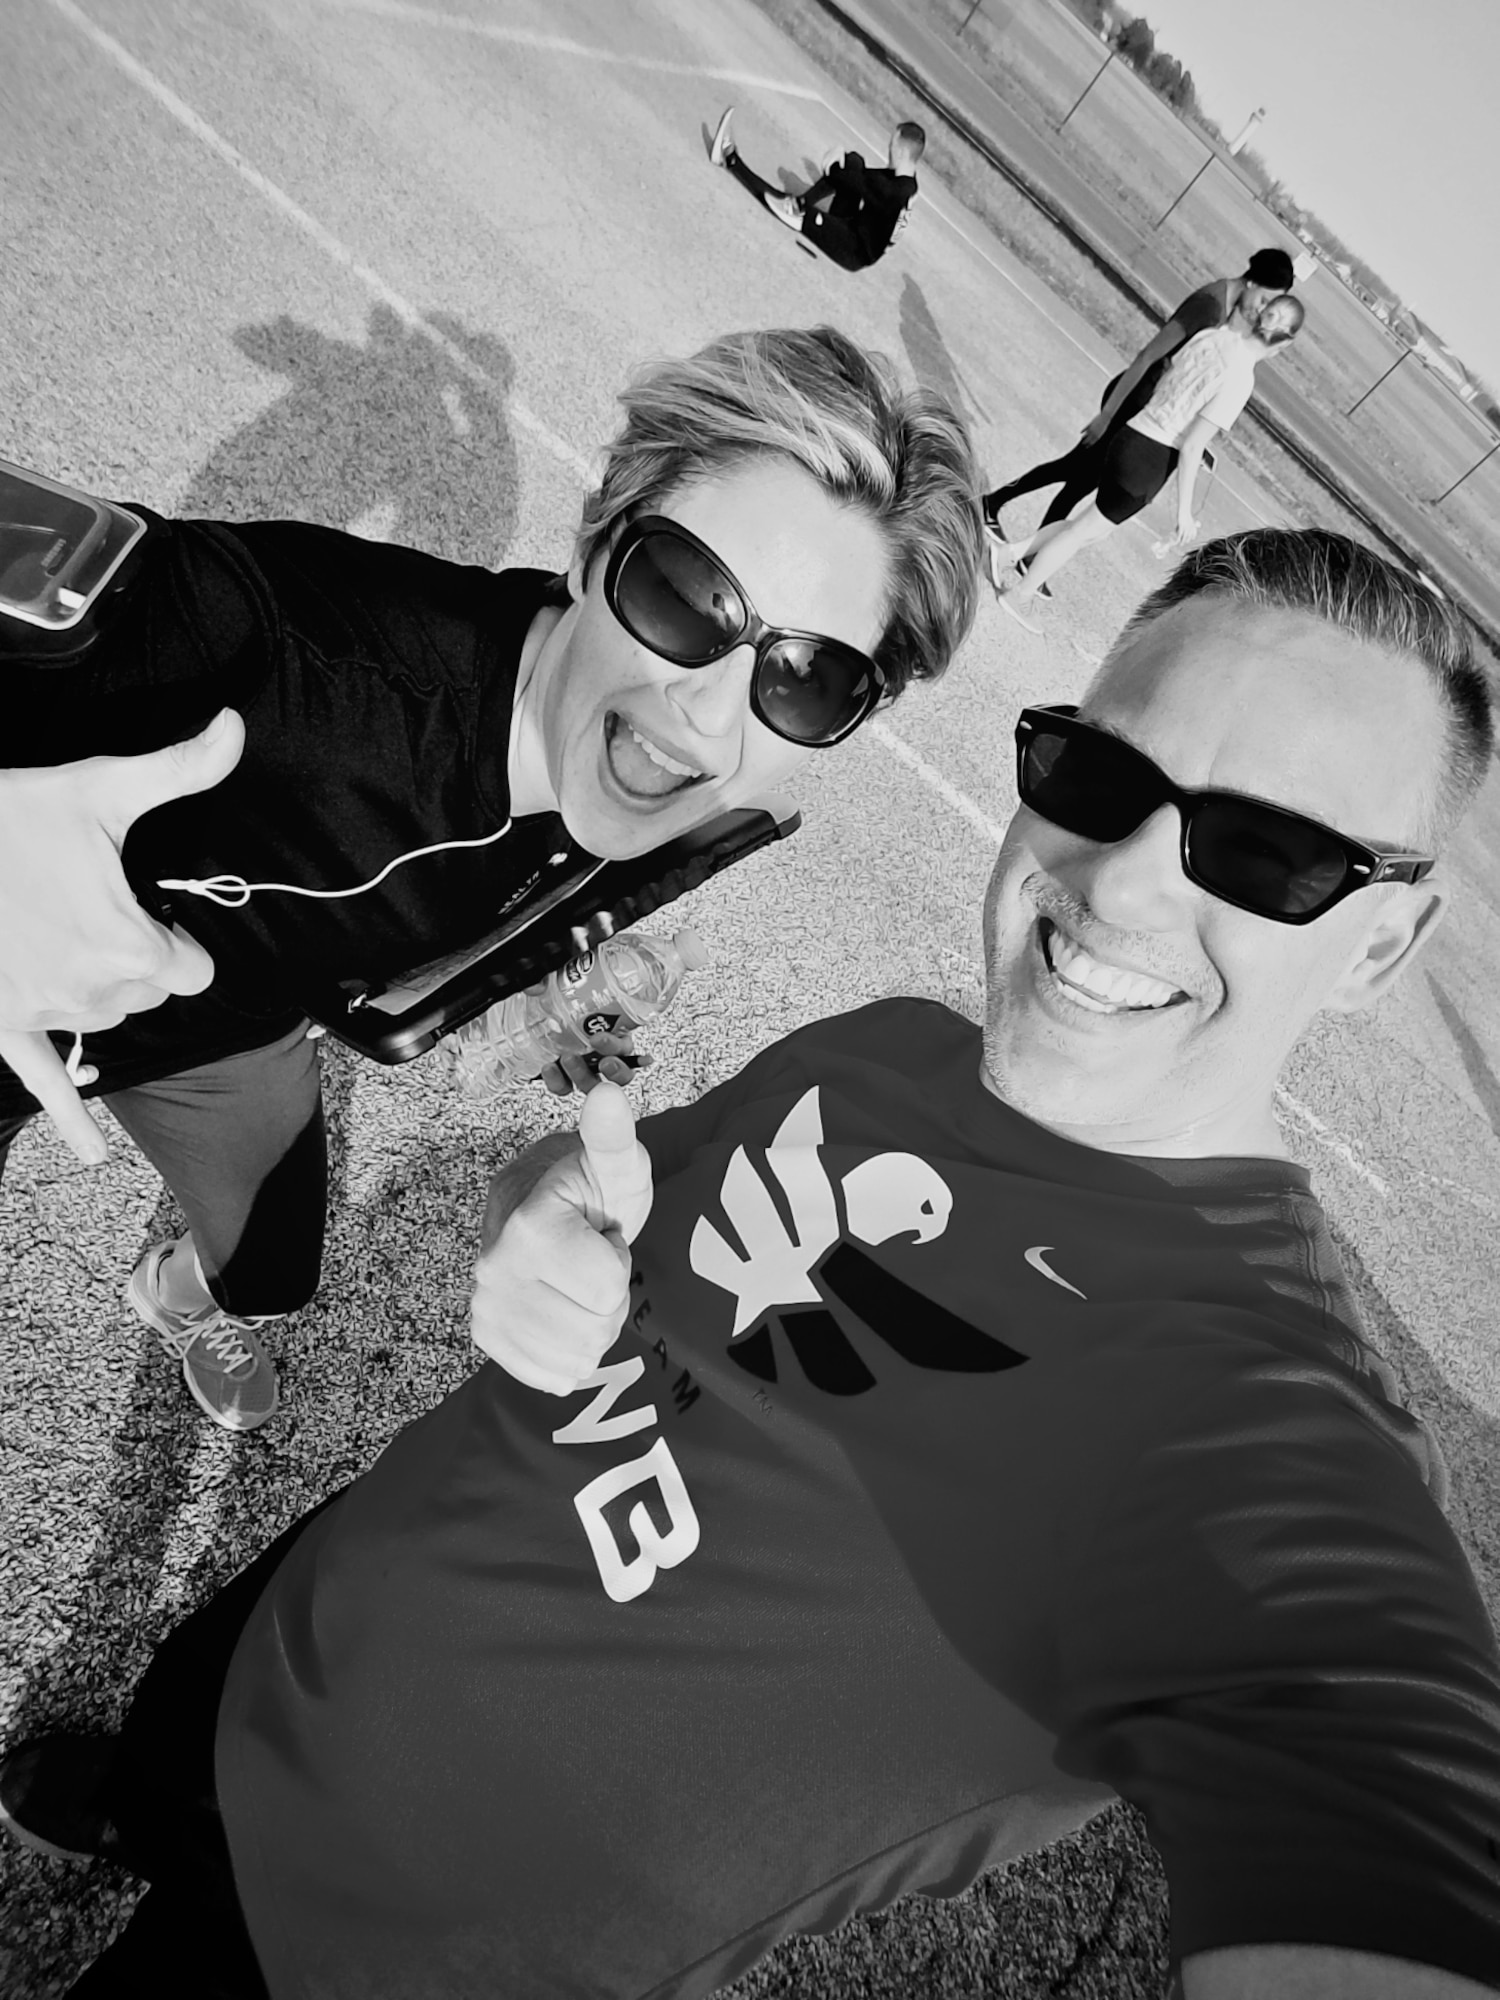 Group 2 leader, Liz Wszalek, gets in a goofy selfie with Christopher Parr, during the long run day for the Scott Health Promotion Running Clinic, March 8, 2017, Scott Air Force Base, Illinois.  Parr chats with Wszalek in the week 6 of the "Turning All Runs Into Fun Runs, or How I Learned to Embrace the Running Suck" weekly blog by Parr. http://www.932aw.afrc.af.mil/News/Commentaries.aspx  (U.S. Air Force photo by Christopher Parr)